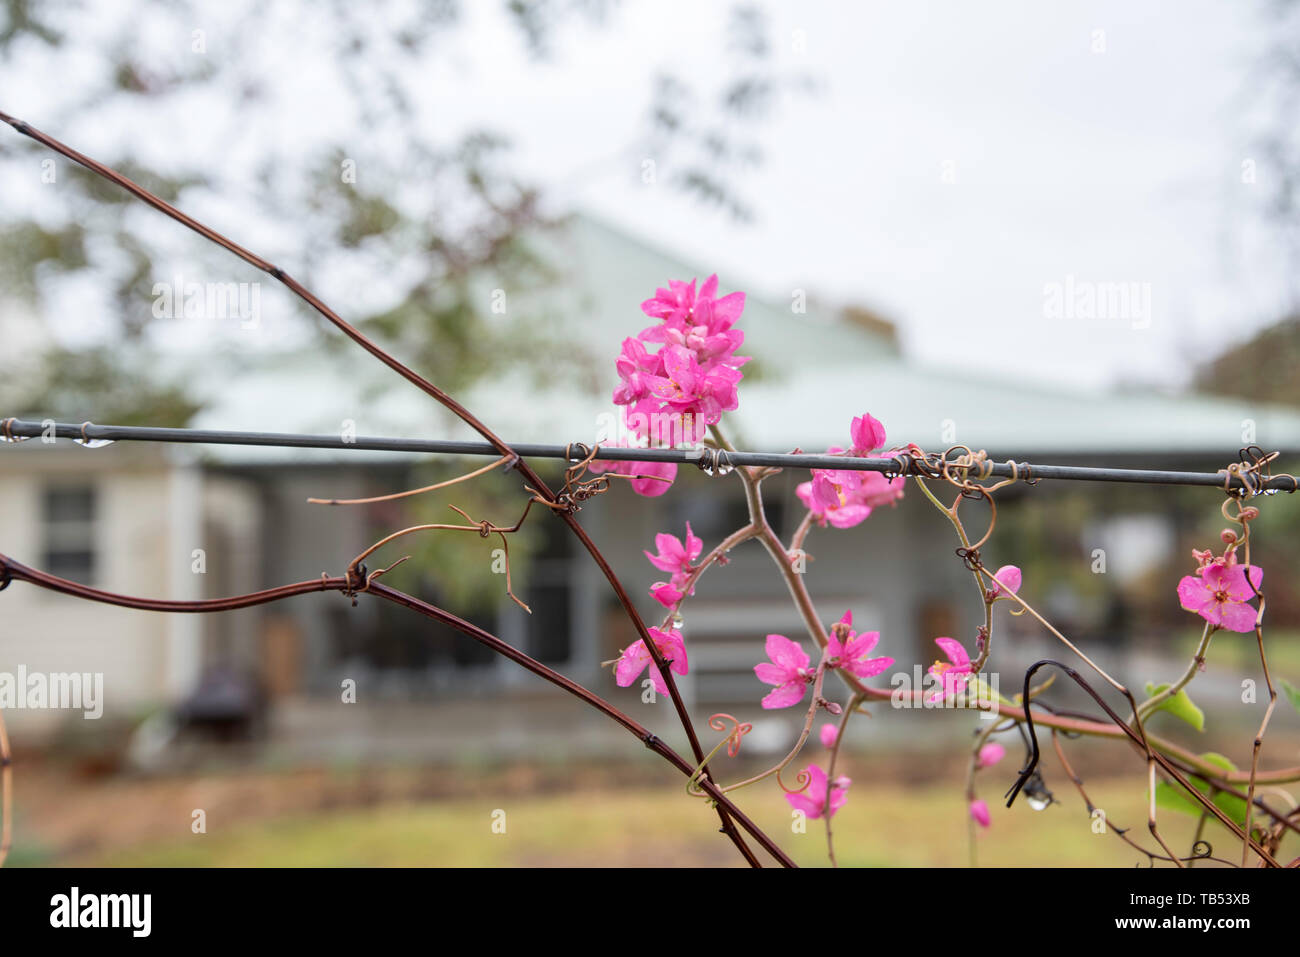 Pink flowering Coral Vine (Antigonon leptopus Hook) after a recent shower of rain, growing on a wire fence in front of an Australian farm house Stock Photo